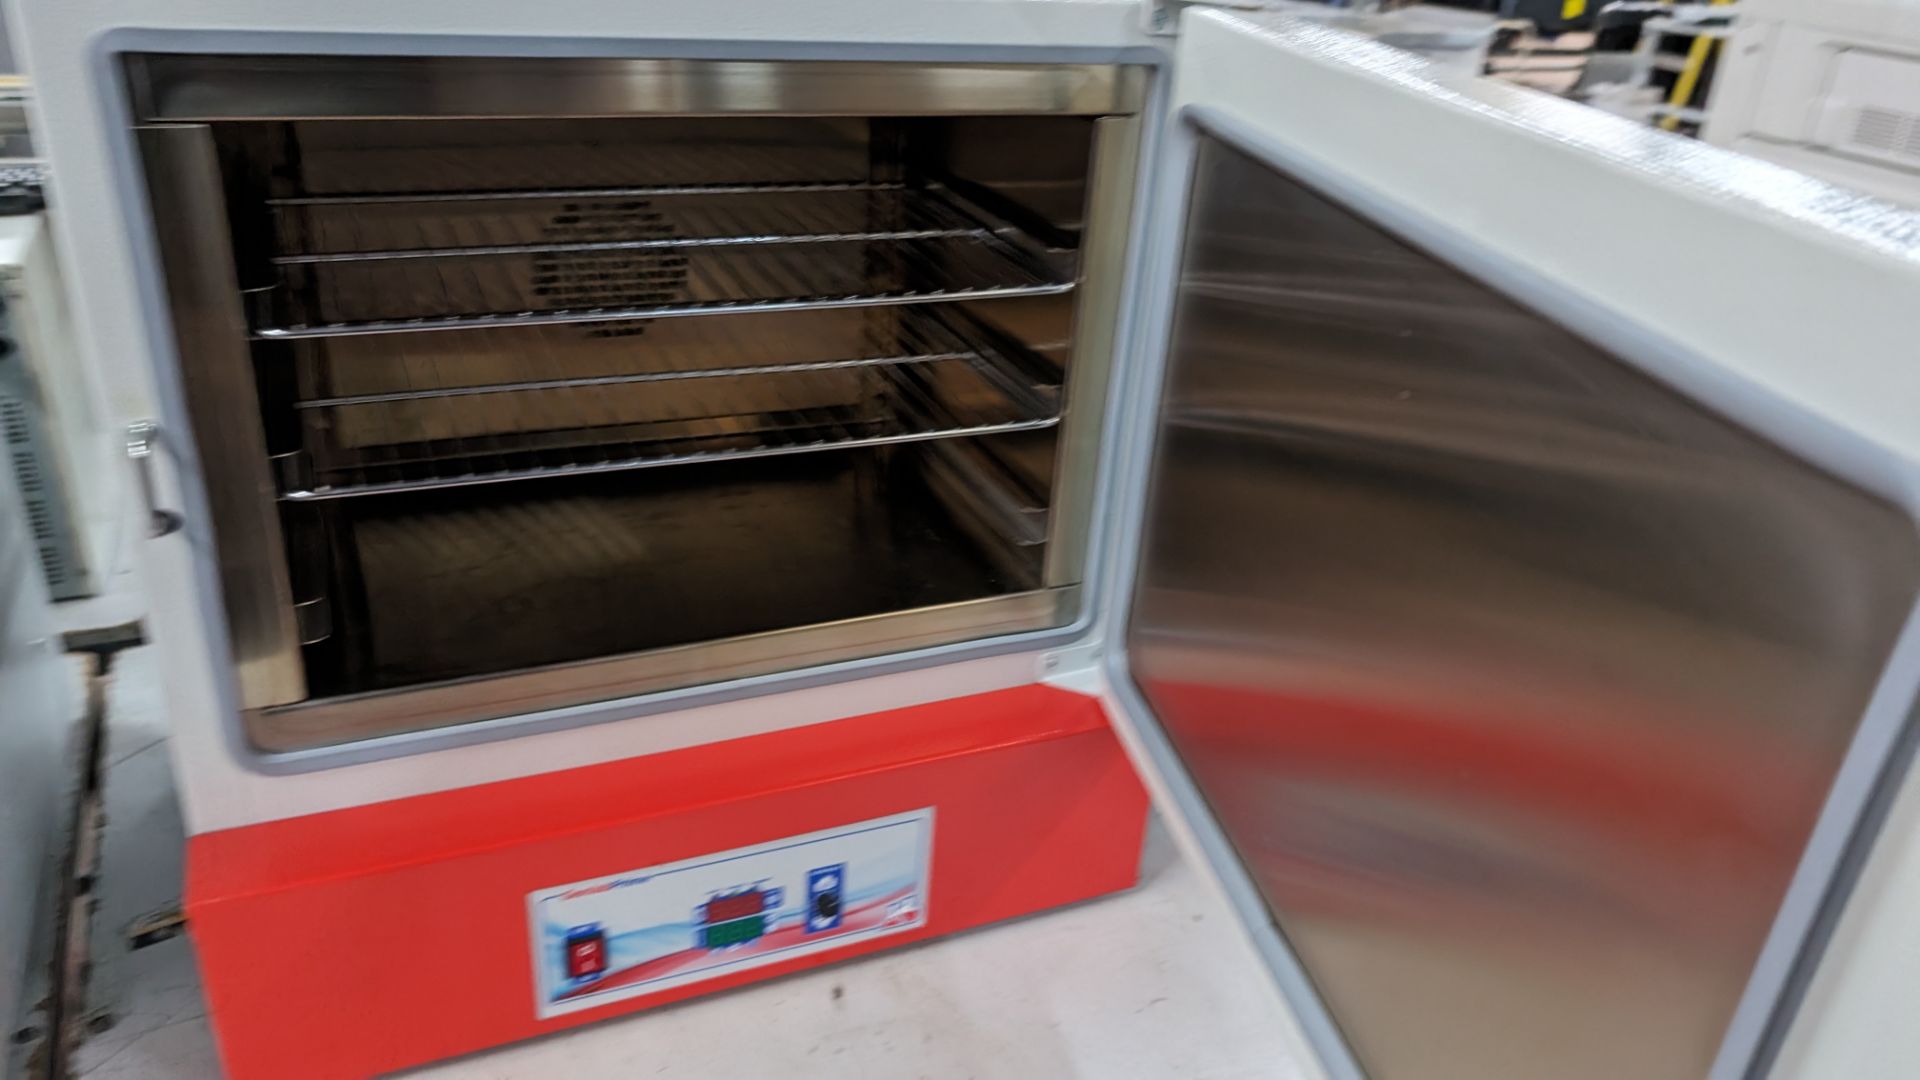 GenLab prime laboratory oven model PRO-50-PDIG-300. Includes pair of Portwest gauntlet gloves - Image 10 of 18